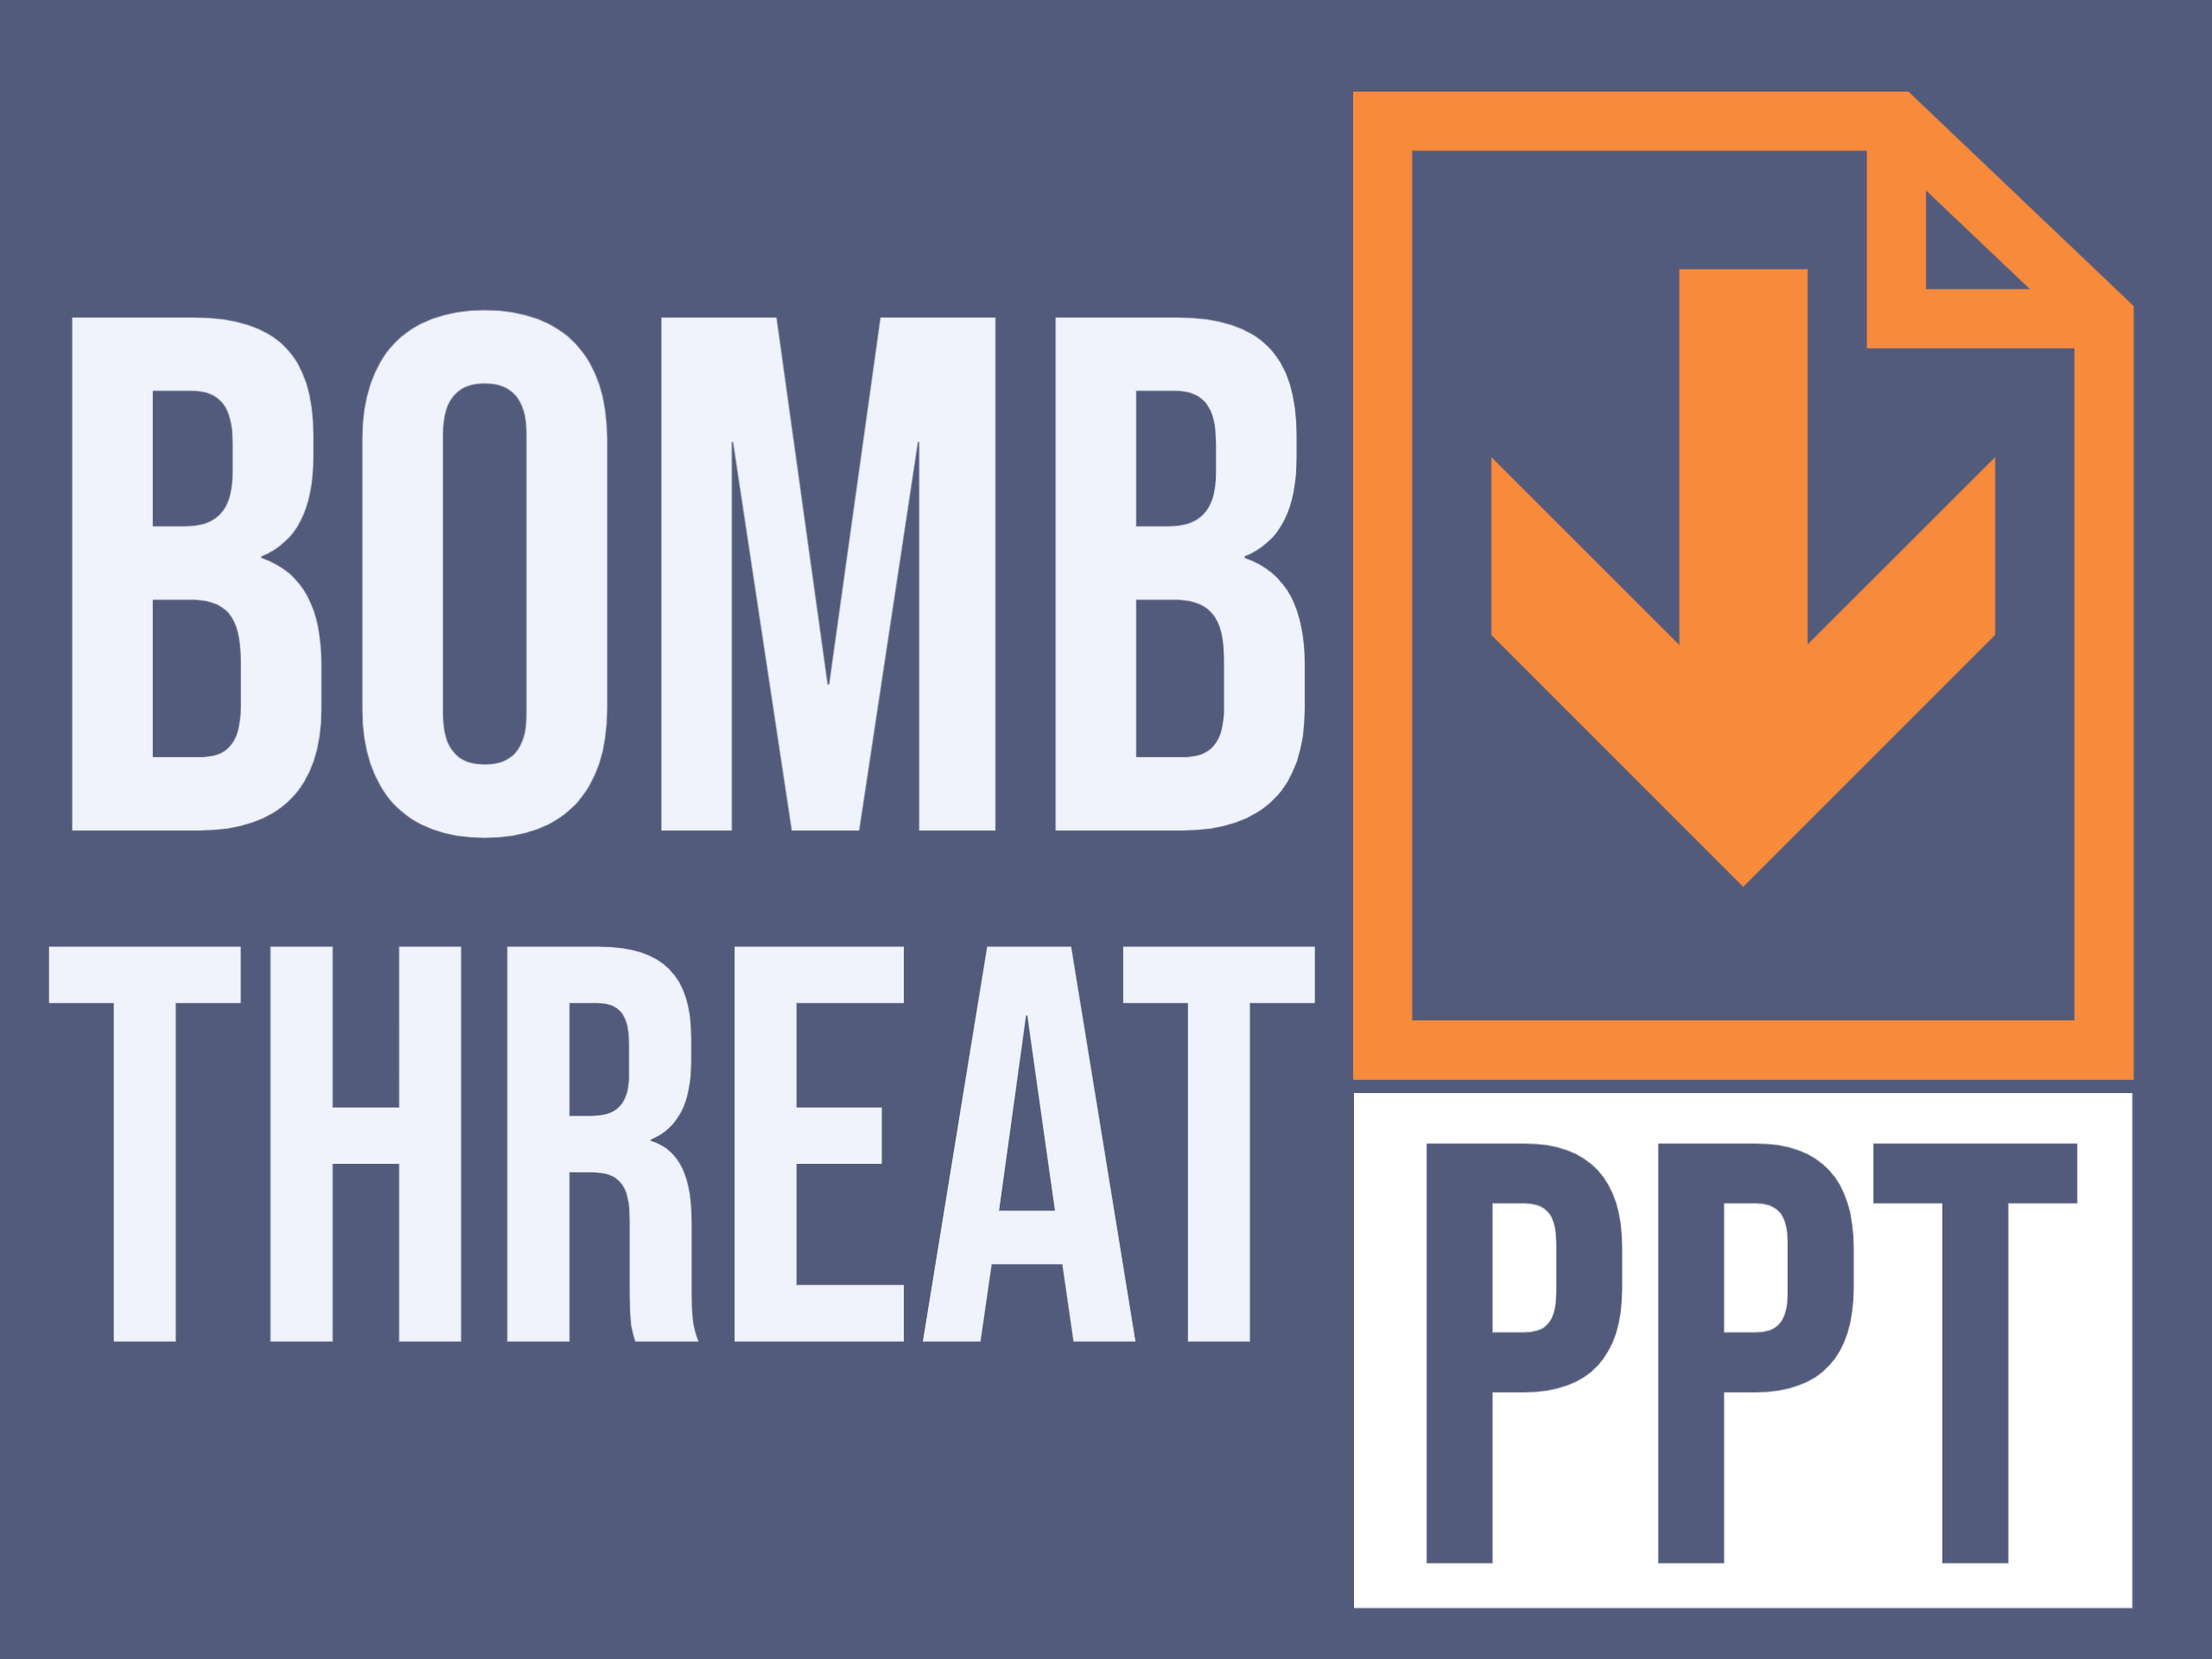 Bomb threat template. Add a bomb threat security assignment instruction or SOP.  Be prepared to deal with a bomb threat being made to you or your organisation.